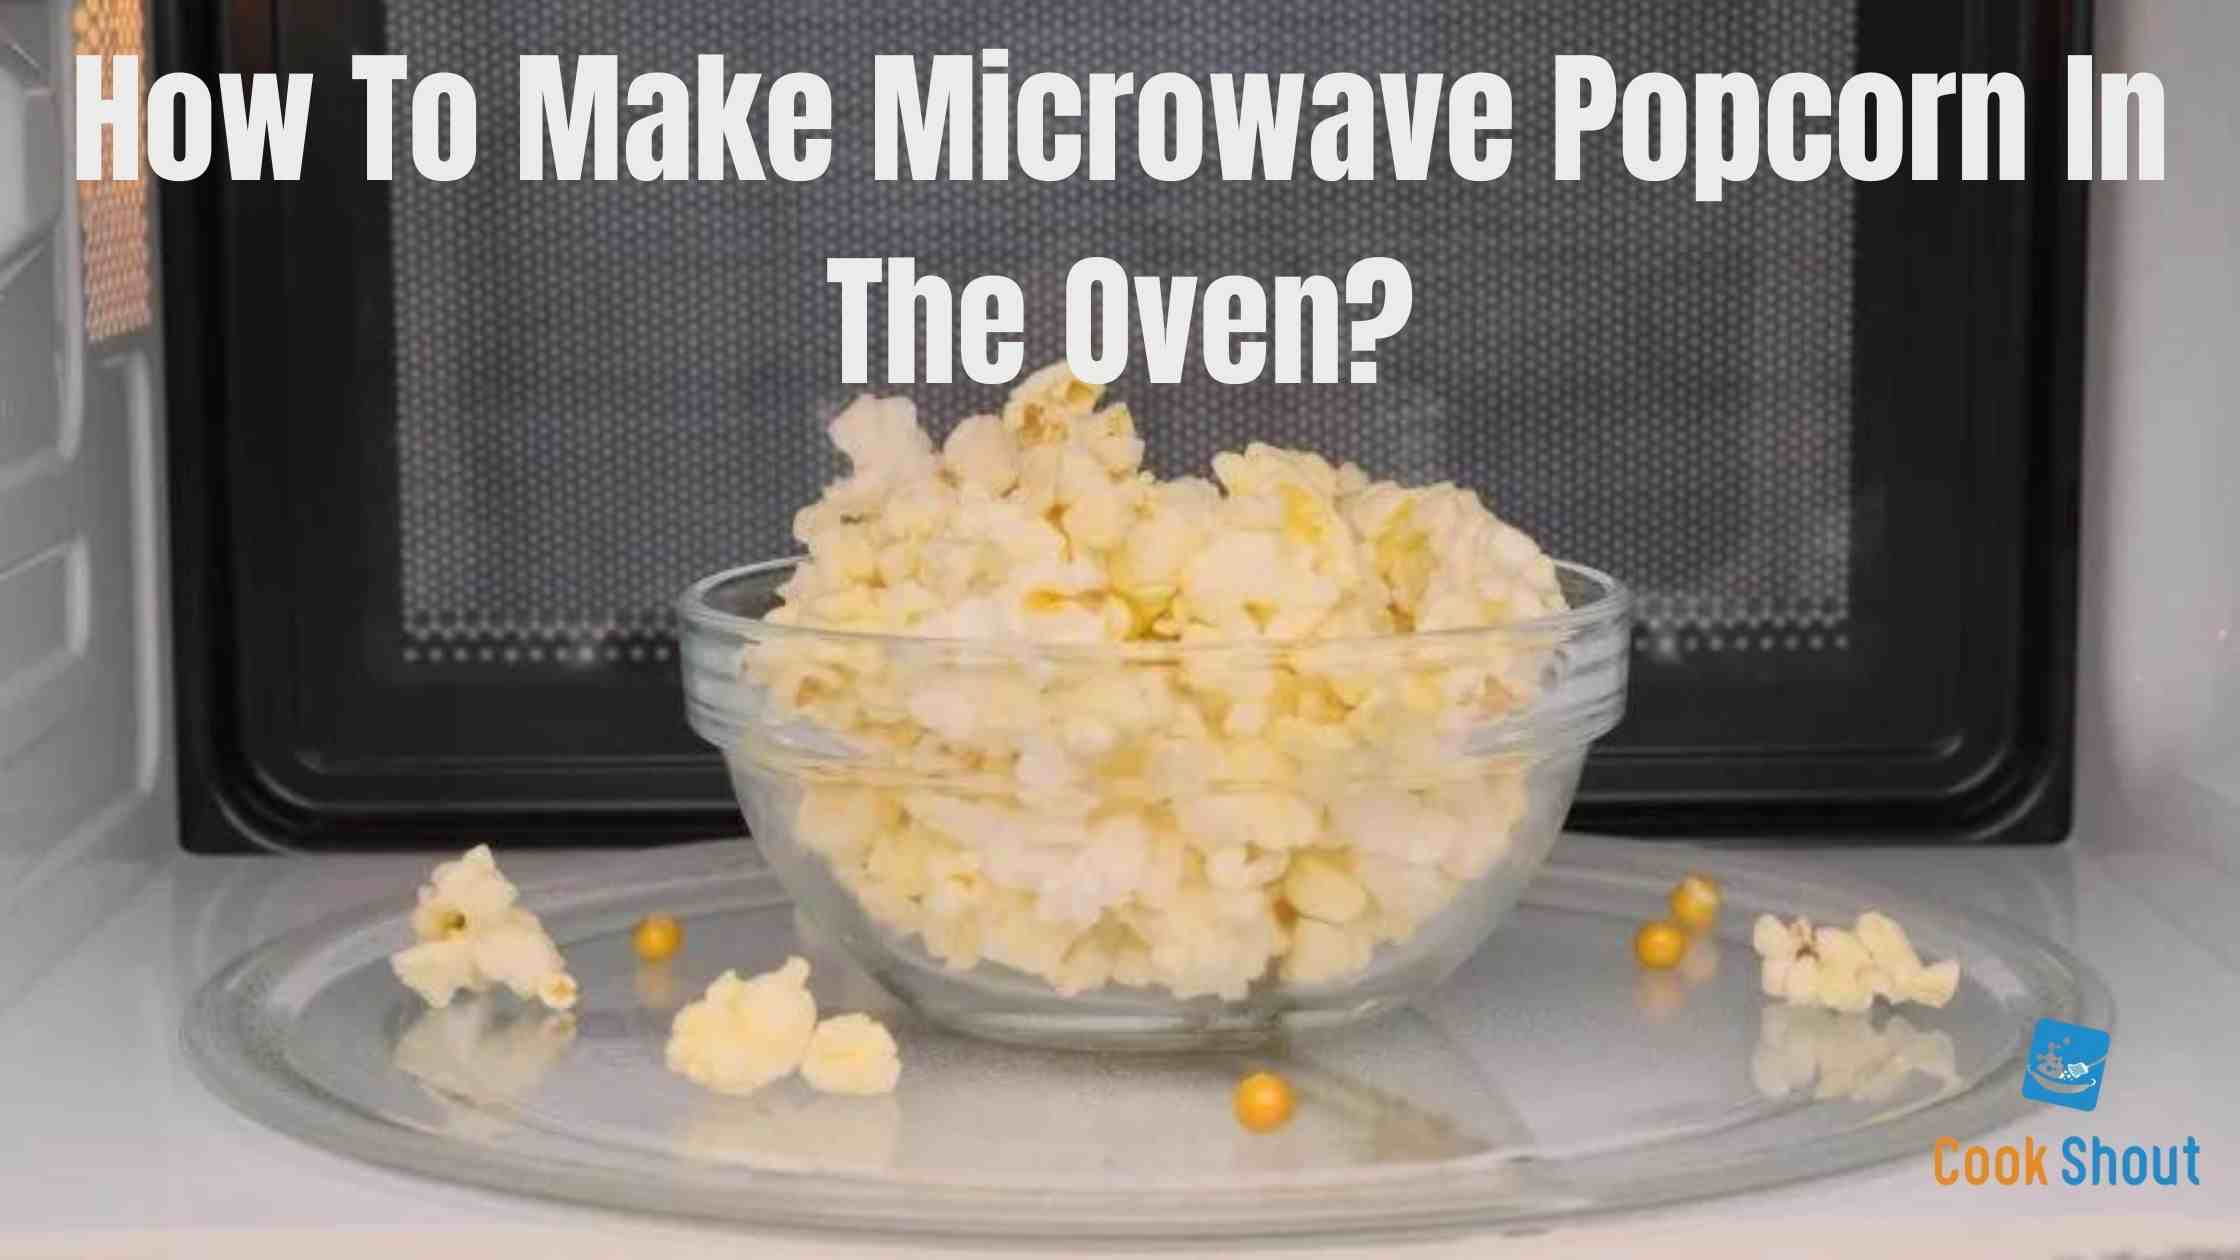 How To Make Microwave Popcorn In The Oven